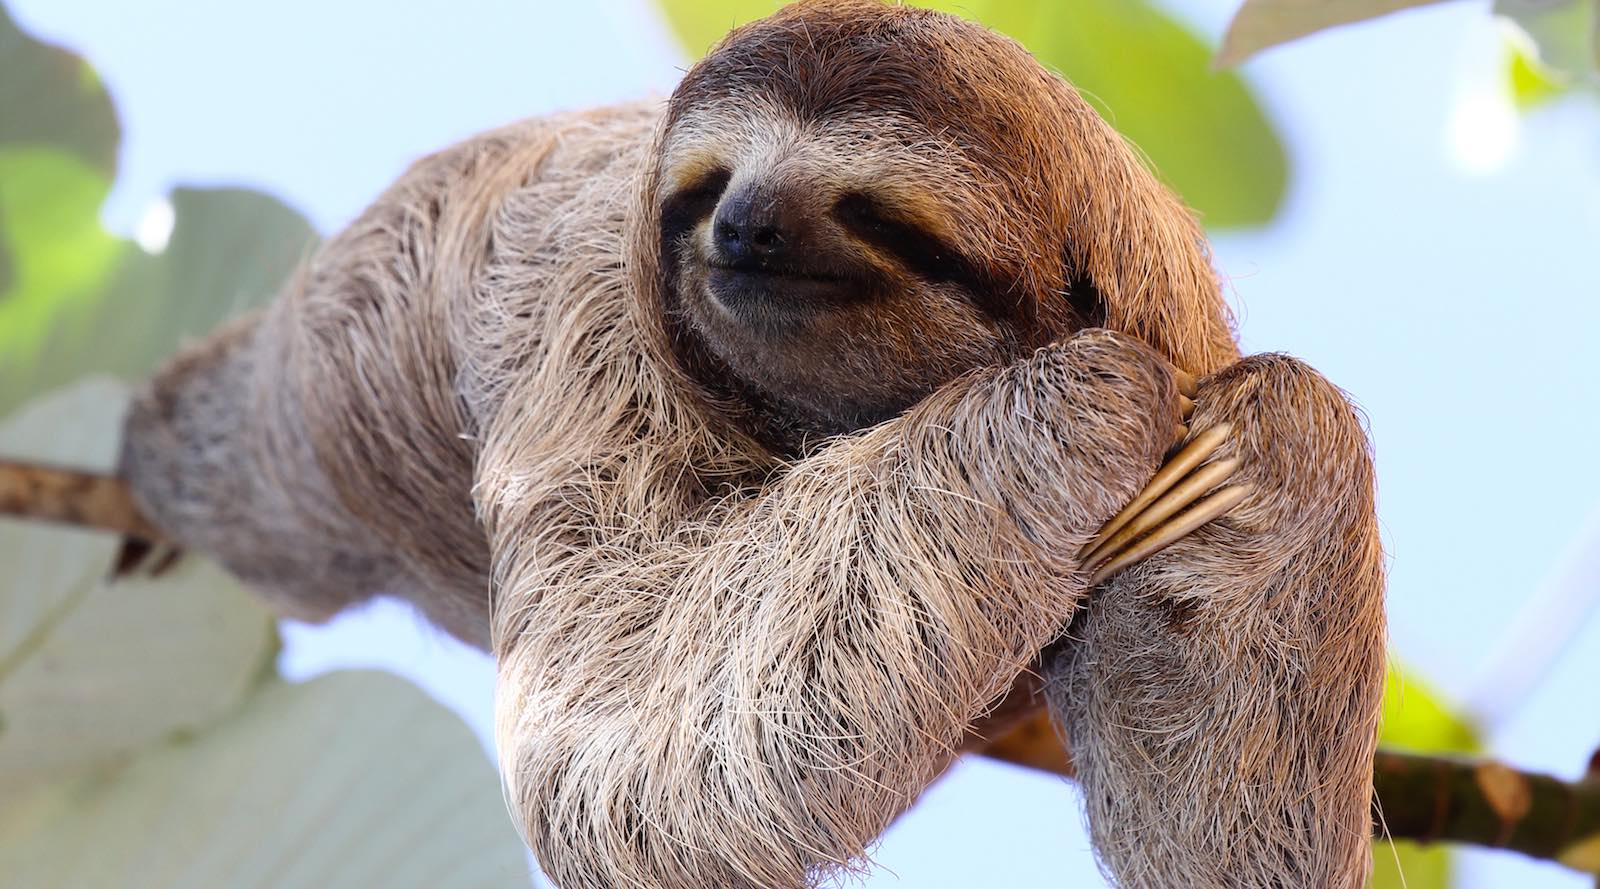 sloth hanging out on branch